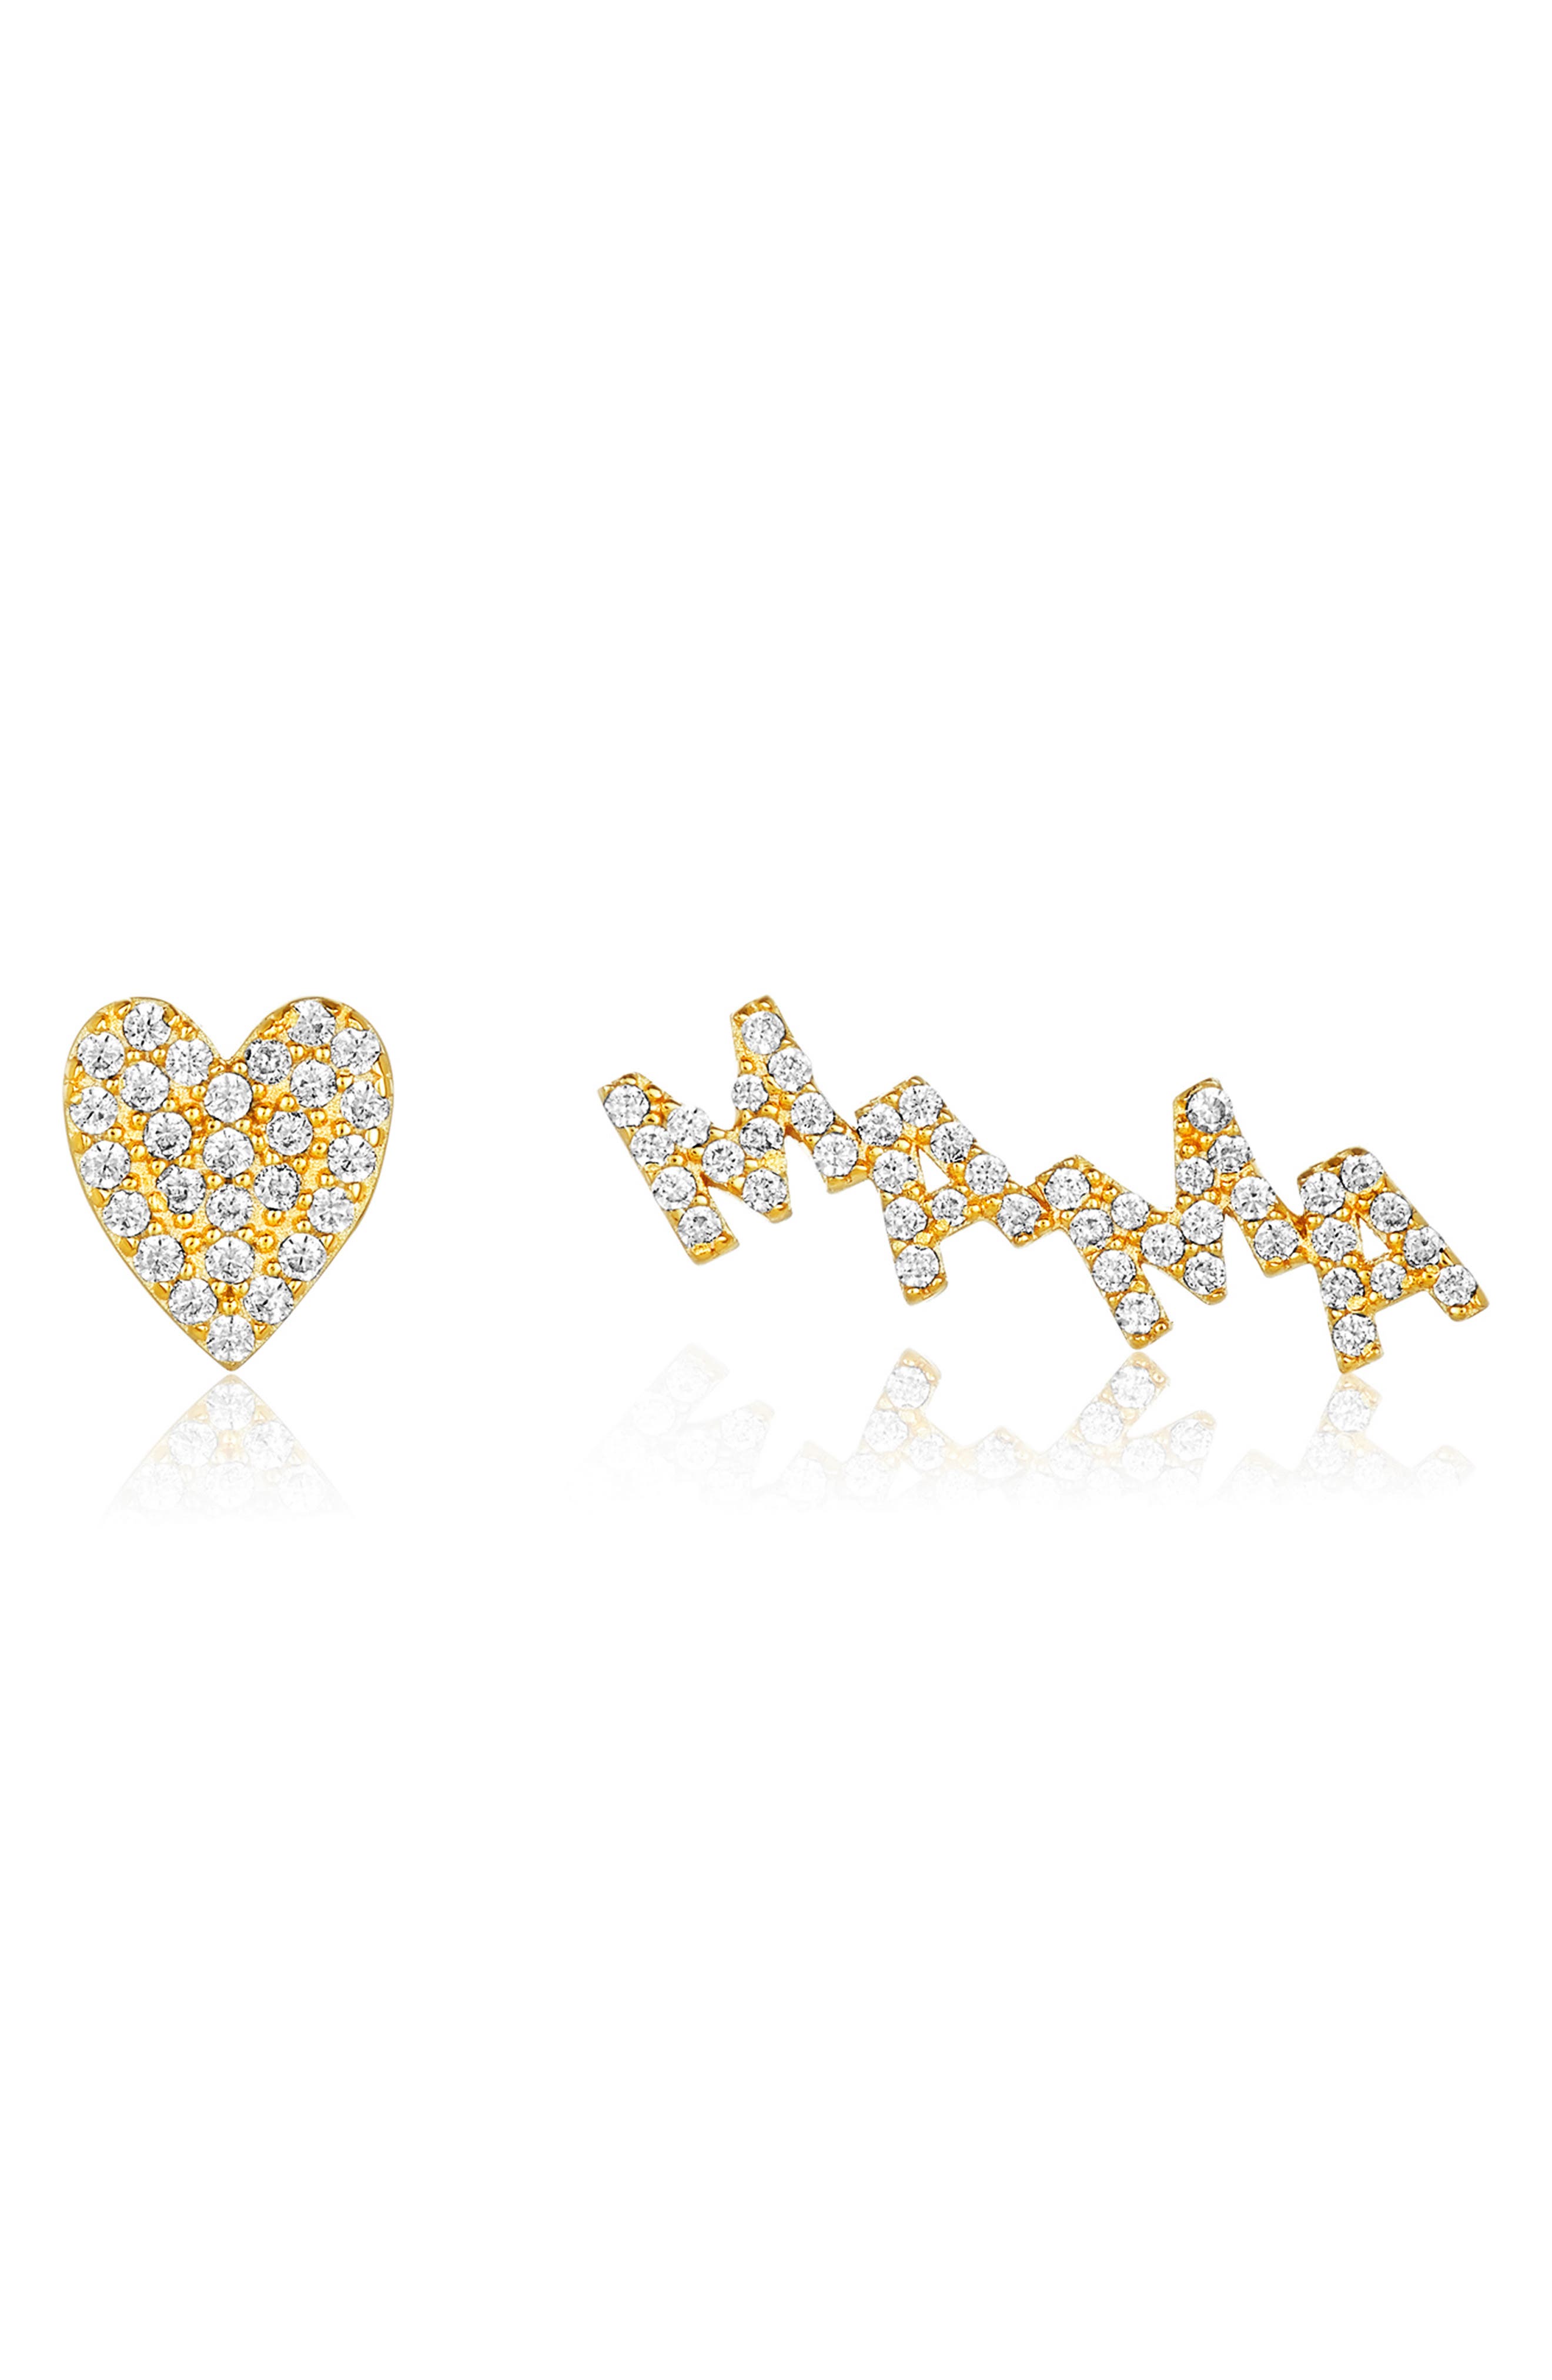 ADORNIA 14K GOLD PLATED PAVE SWAROVSKI CRYSTAL MISMATCHED HEART & MAMA STUD EARRINGS,791109046319